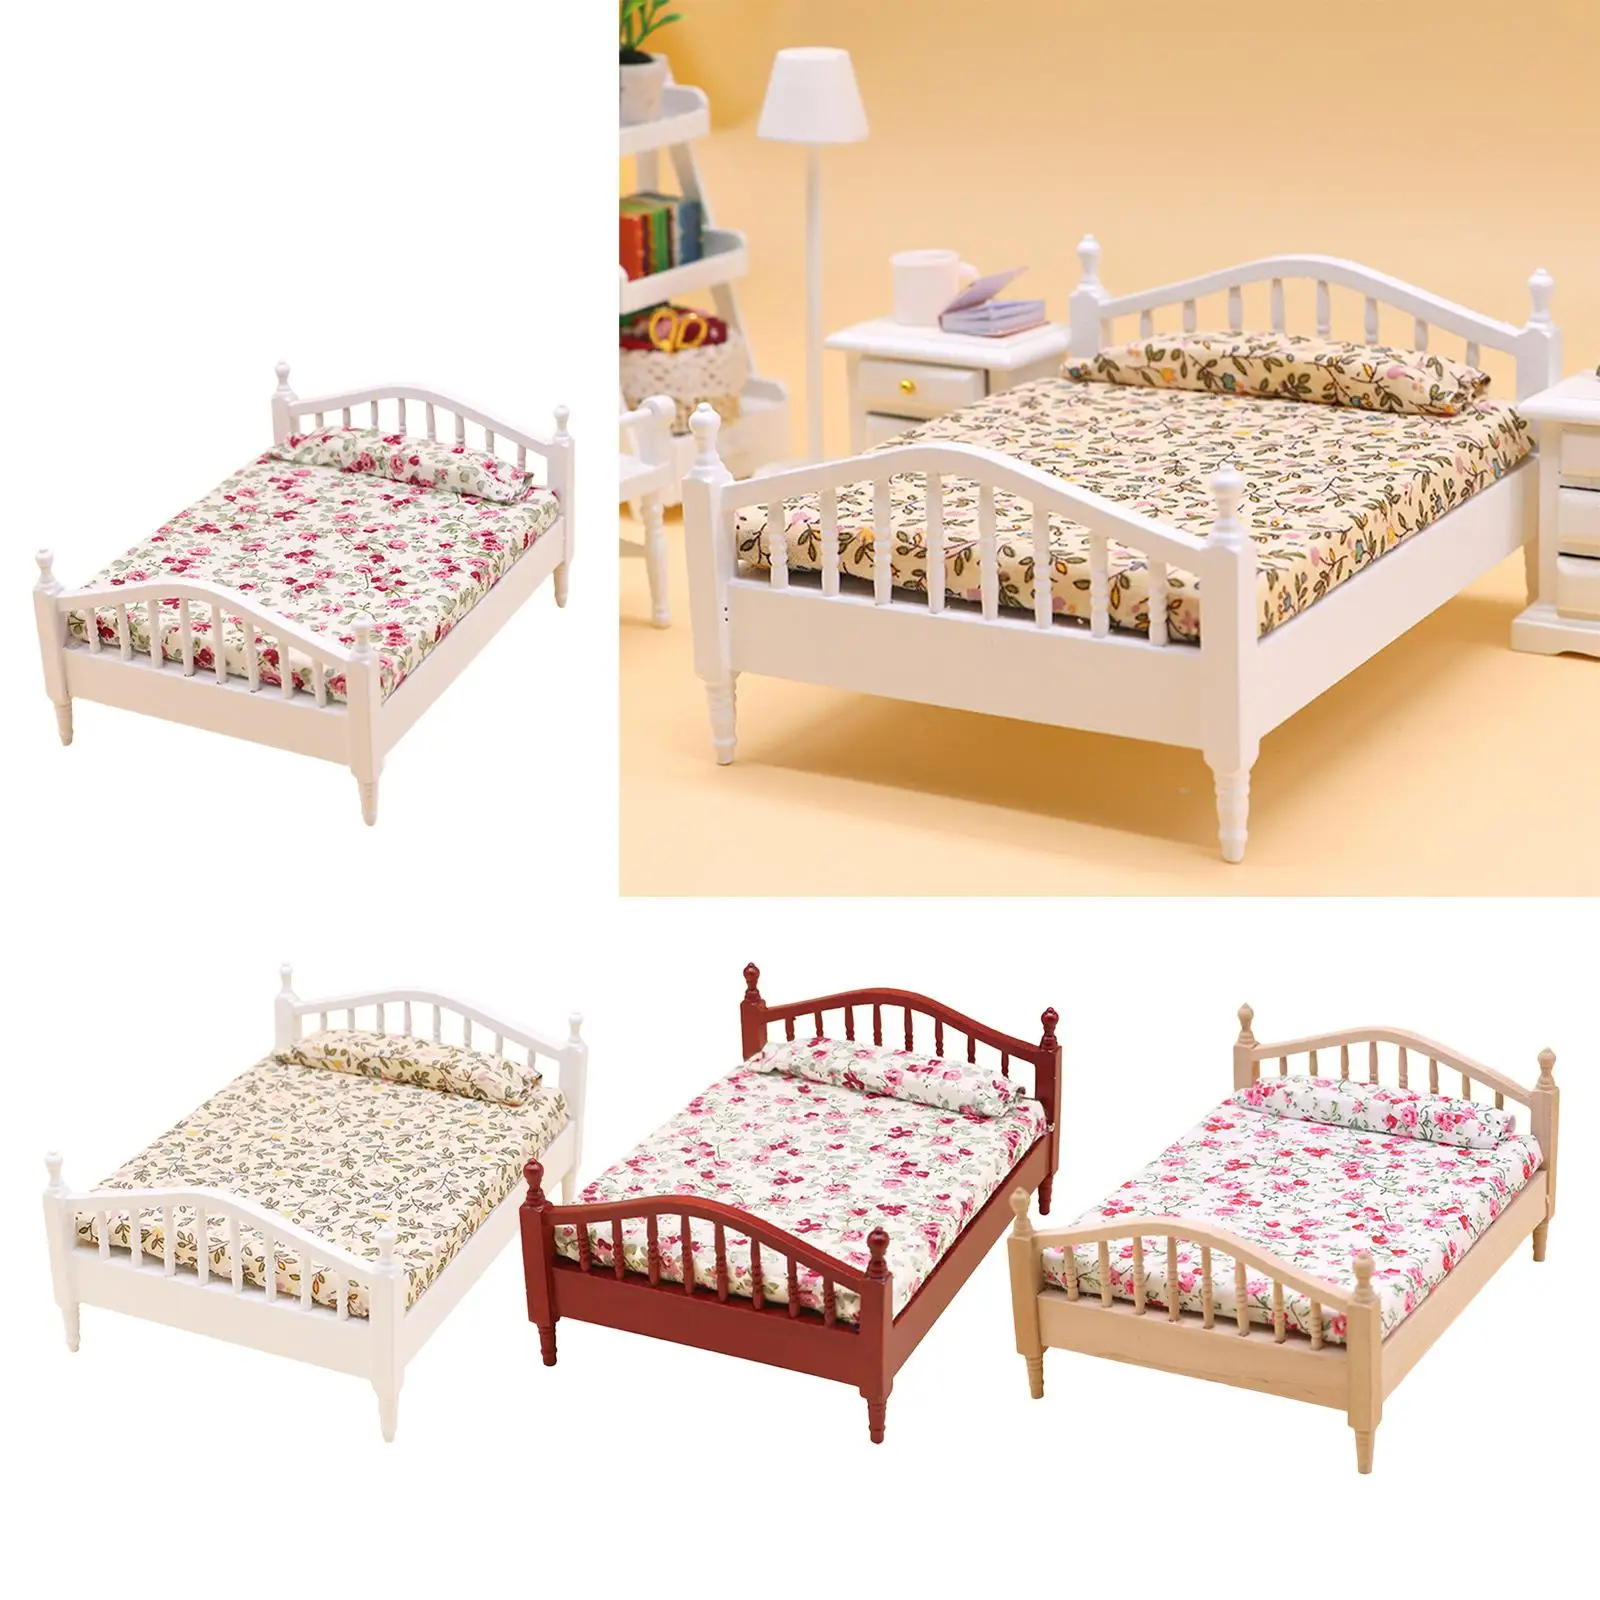 1/12 Mini Bed Miniature Dollhouse Decoration Accessories for Room Decoration